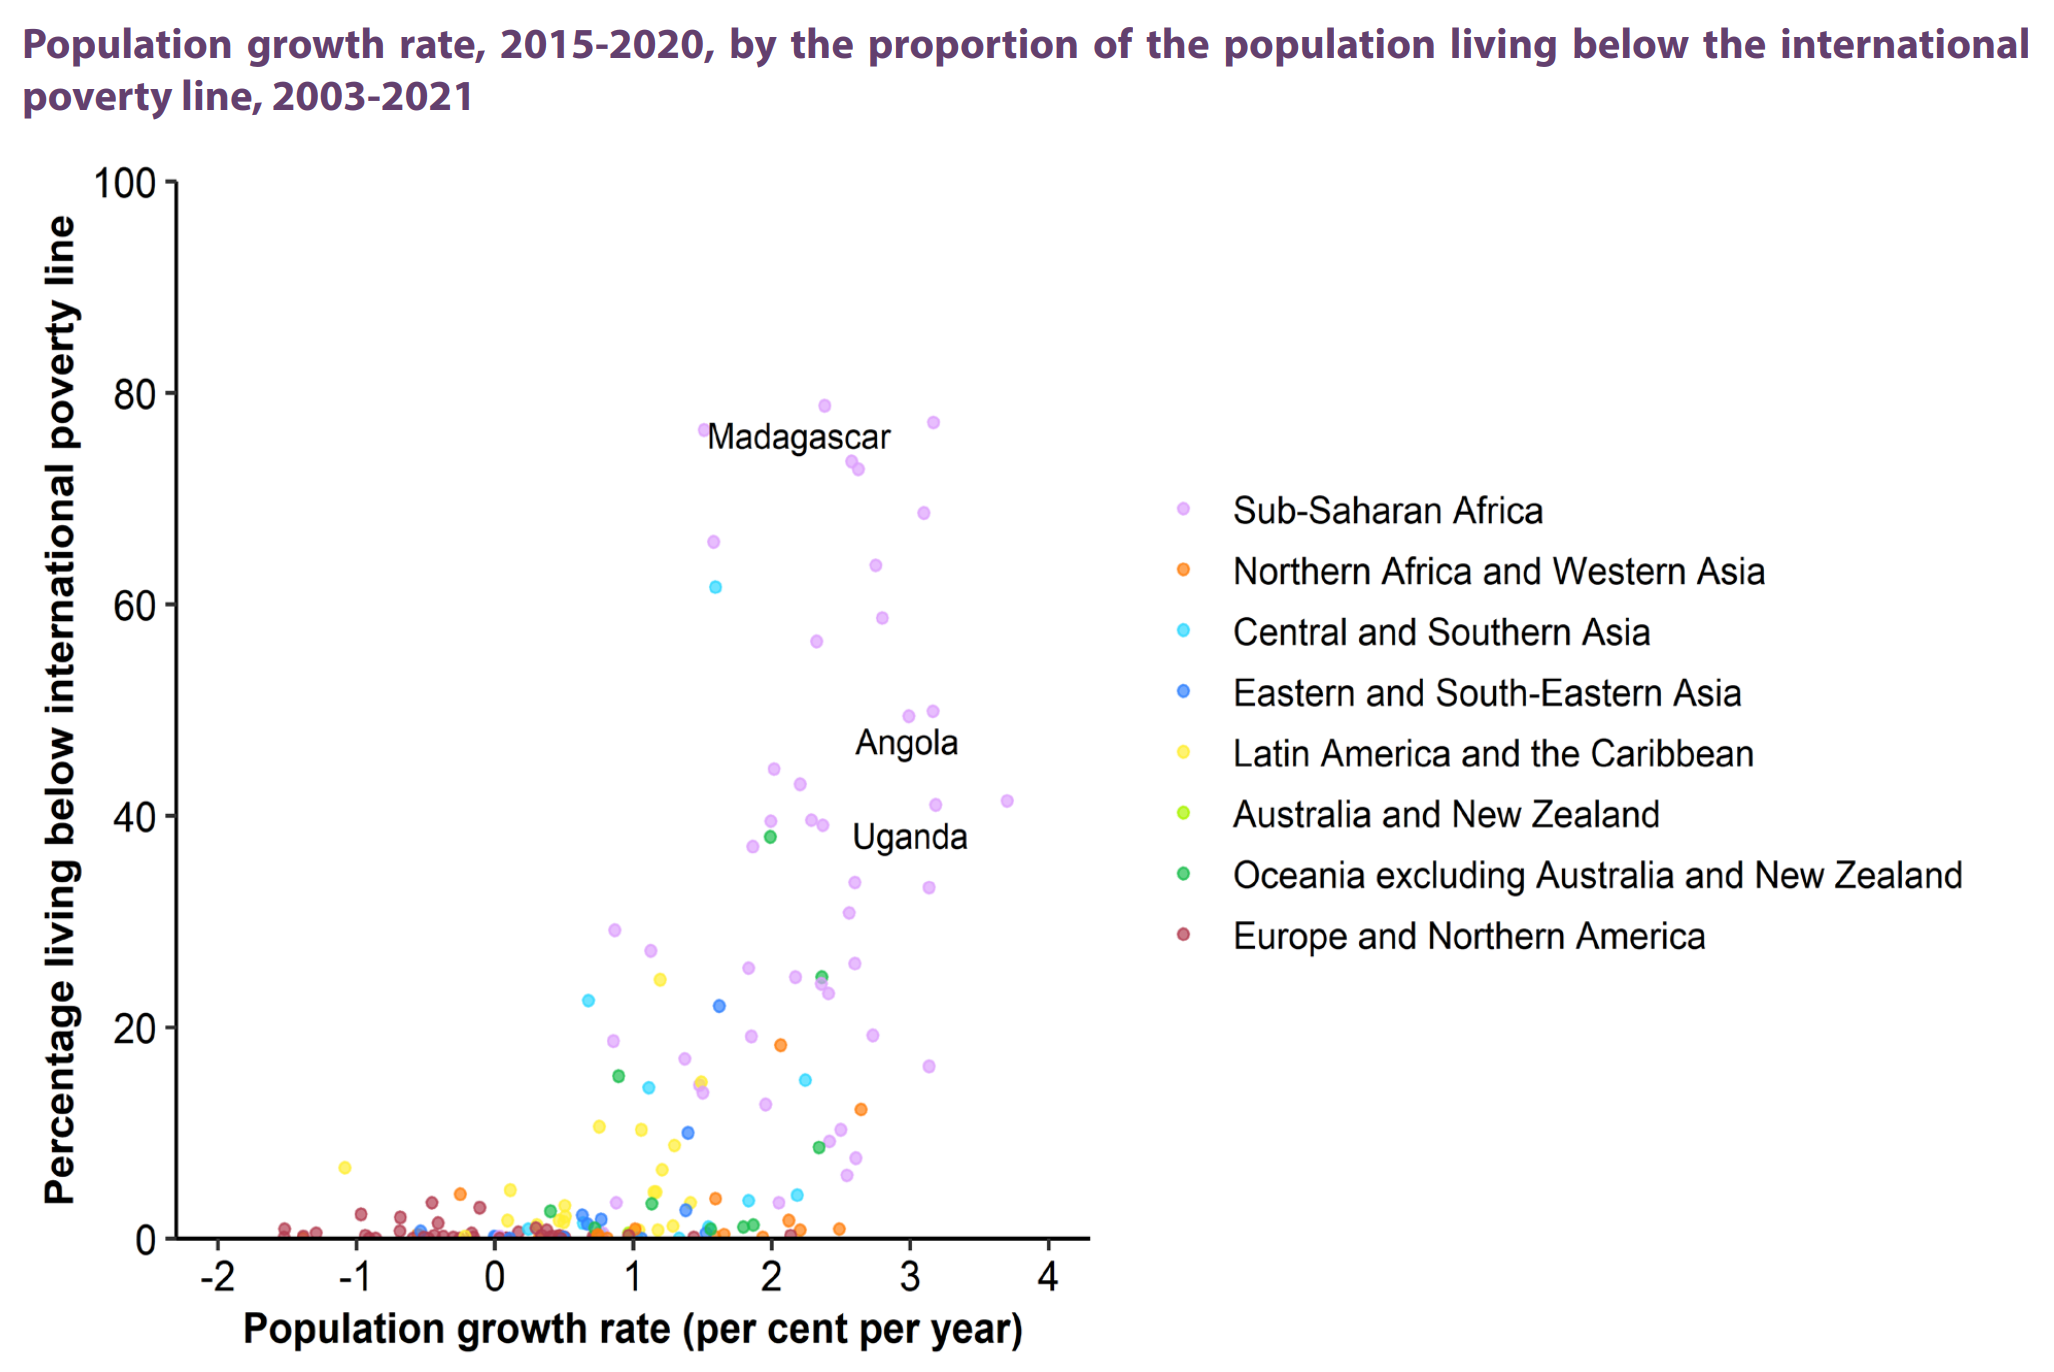 Population growth rate, 2015-2020, by the proportion of the population living below the international poverty line, 2003-2021. Reducing poverty in the context of rapid population growth remains a formidable challenge. In many cases, even though poverty reduction strategies may lift large numbers of people out of poverty, the proportion of the population living below the poverty line may be stagnant or even increase. The population in many countries in sub-Saharan Africa is projected to double between 2022 and 2050, putting additional pressure on already strained resources and challenging policies aimed to reduce poverty and inequalities. For example, Angola has experienced population growth rates above 3 per cent per year since the early 1970s due to the combined effect of persistent high fertility levels and remarkable reductions in infant and child mortality, in particular during the past two decades. In 2018, around half of the population in that country was living in extreme poverty. From 2008 to 2018, the increase in the number of people living in extreme poverty (109 per cent) outpaced the growth of the total population (44 per cent). Graphic: UN DESA